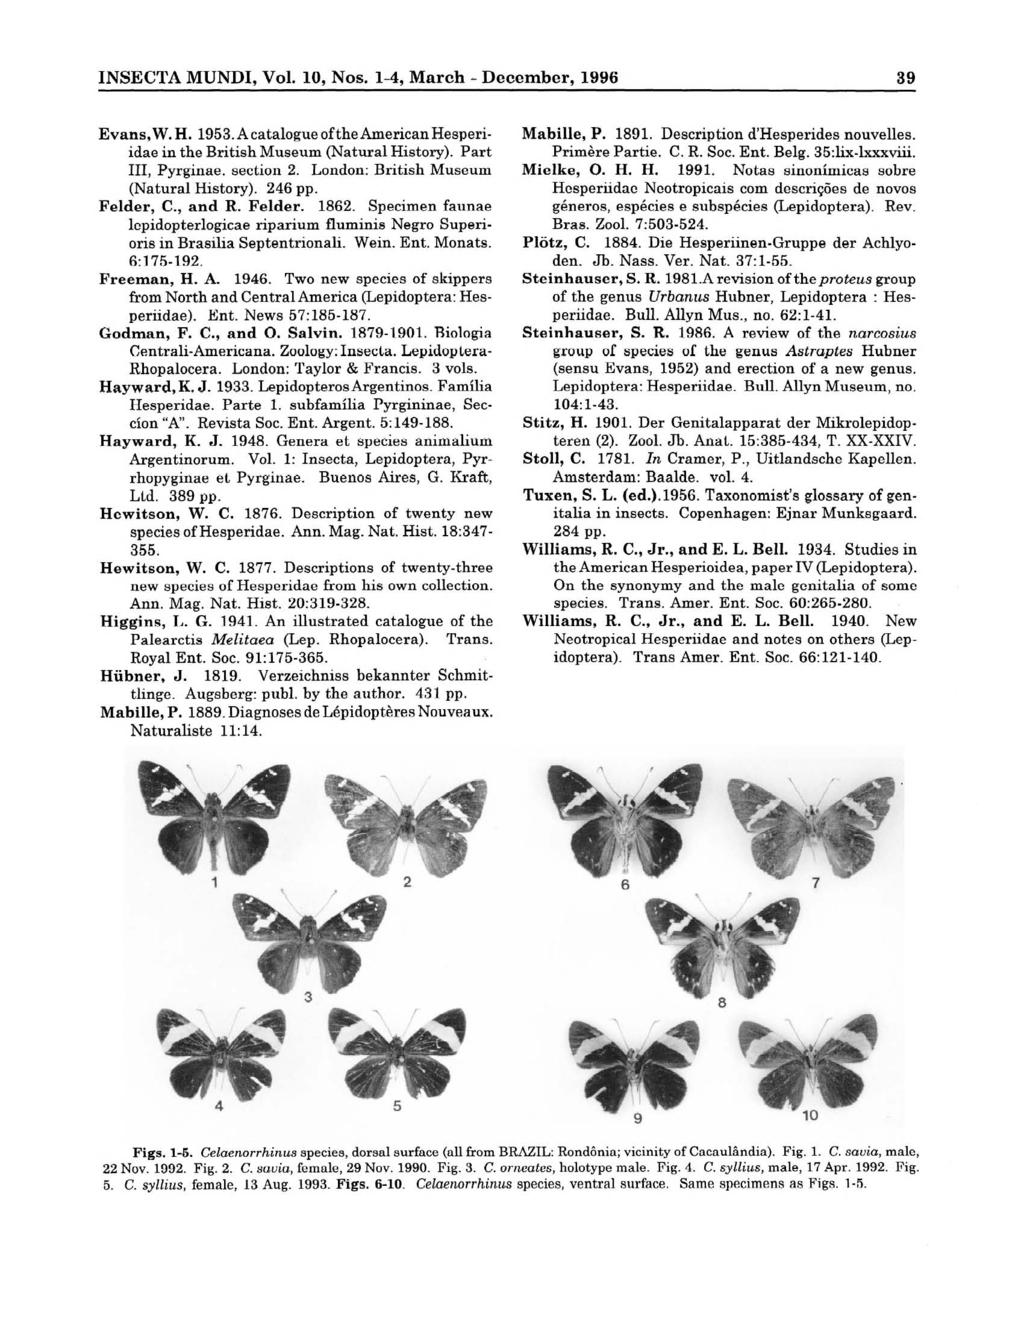 INSECTA MUNDI, Vol. 10, Nos. 1-4, March -December, 1996 89 Evans,W. H. 1953.A catalogue ofthe American Hesperiidae in the BritishMuseum (Natural History). Part 111, Pyrginae. section 2.